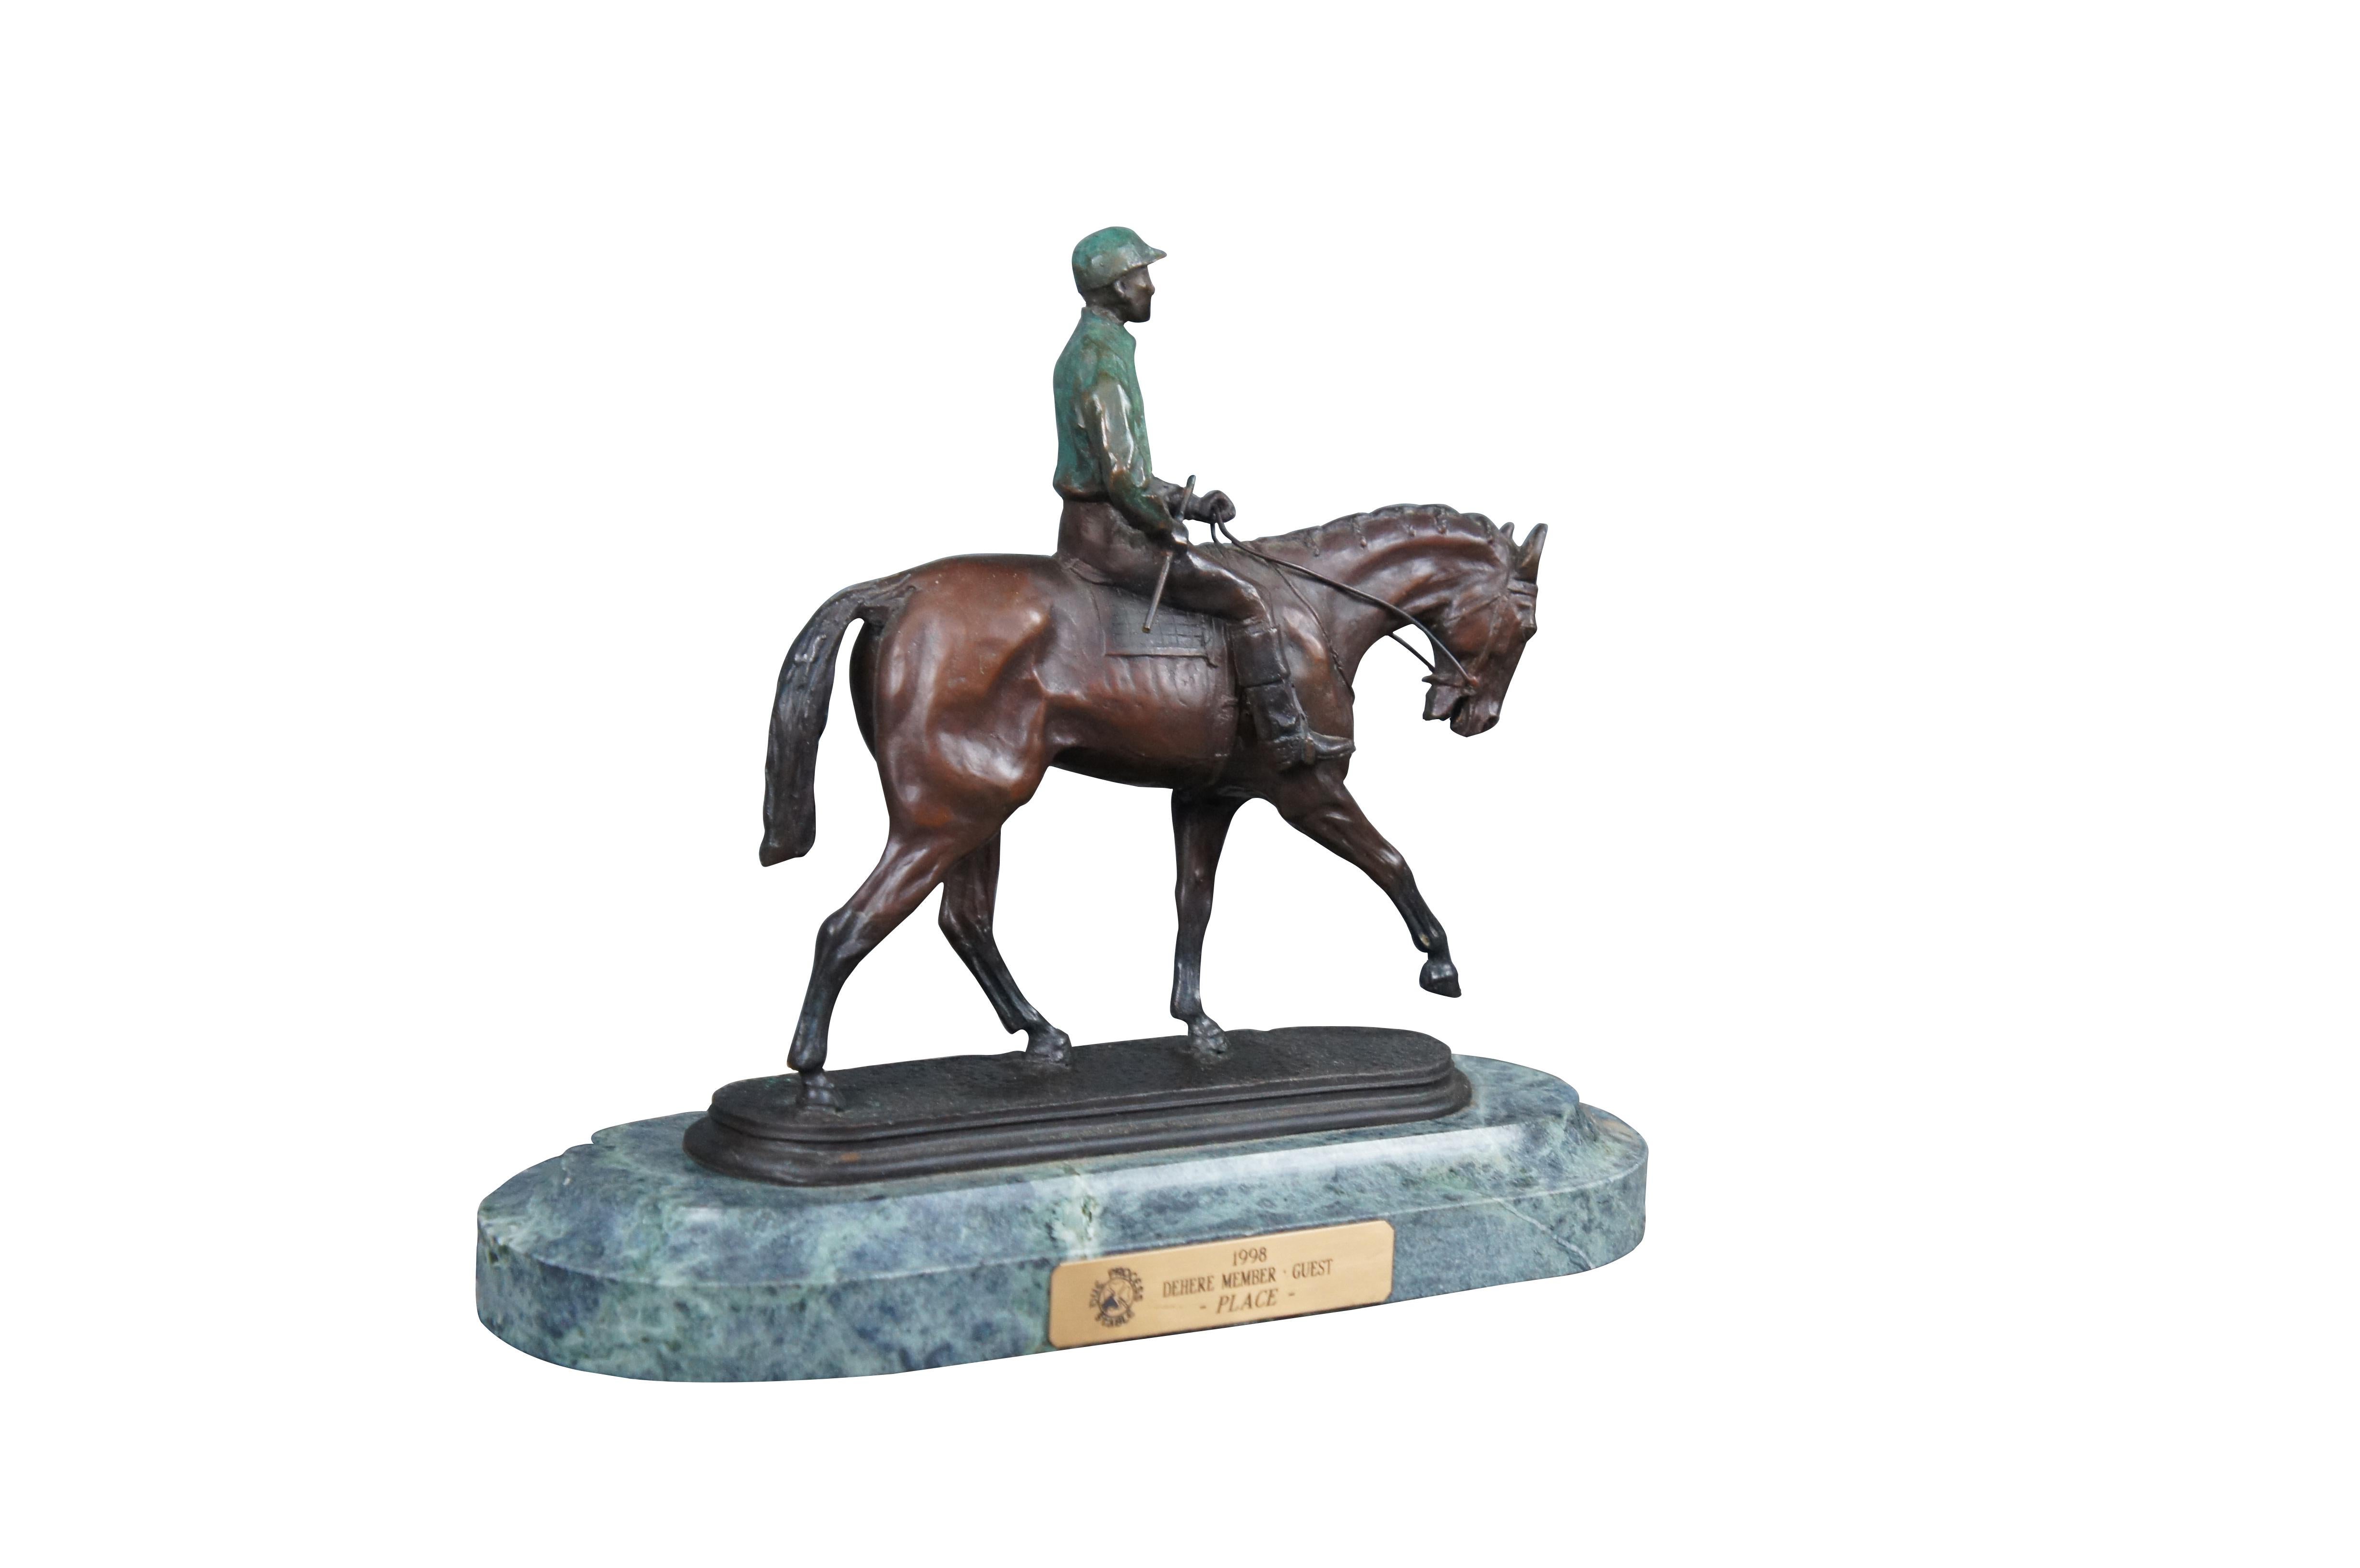 Vintage horse trophy / statue / sculpture. Made of bronze featuring an oval marble base and plaque from the Dehere Member Guest tournament at Due Process Golf Club and Stables in Colts Neck New Jersey. 

Pierre-Jules Mêne (25 March 1810 – 20 May